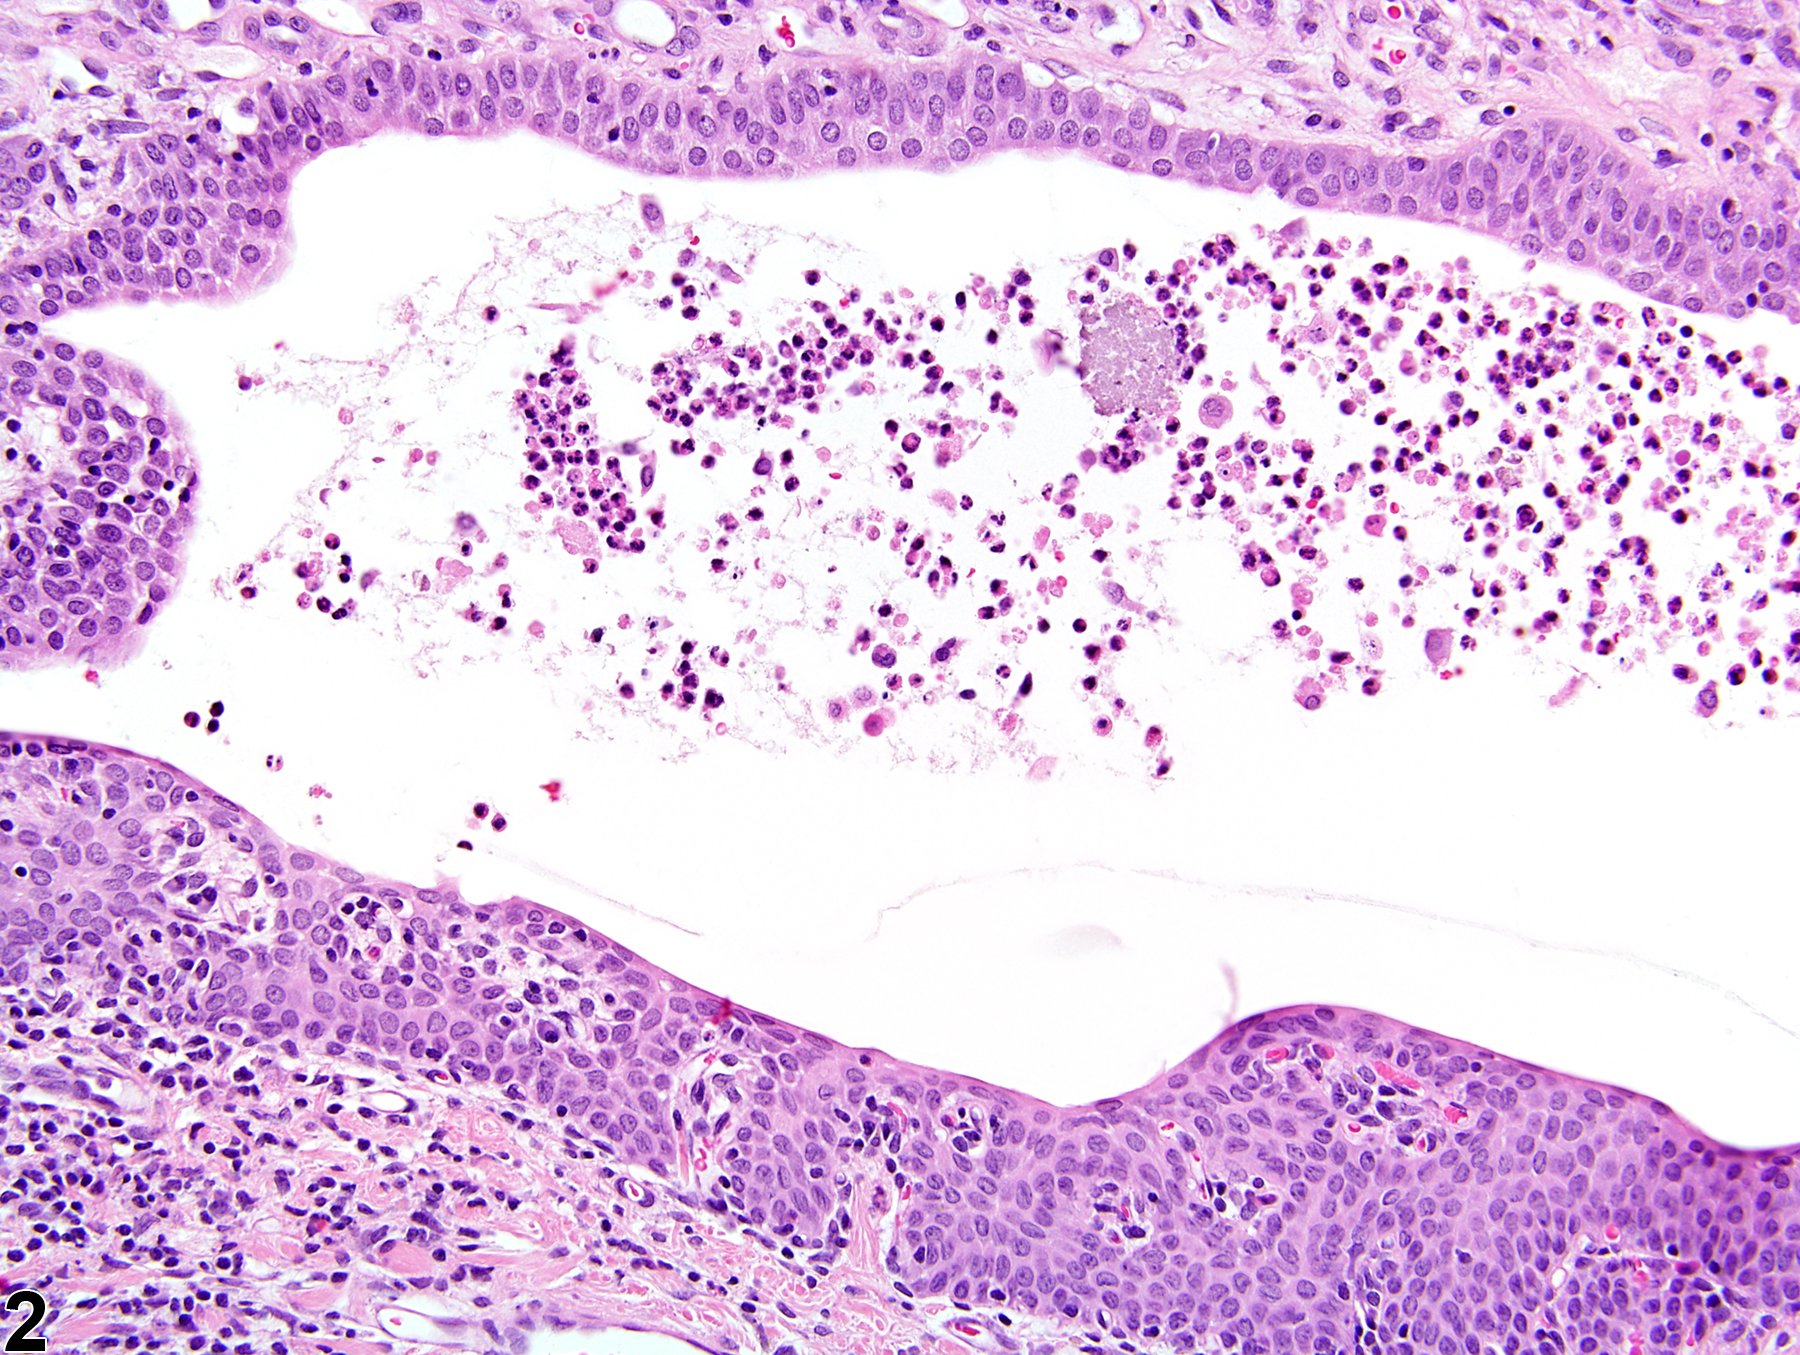 Image of urothelium hyperplasia in the kidney from a female F344/N rat in a chronic study